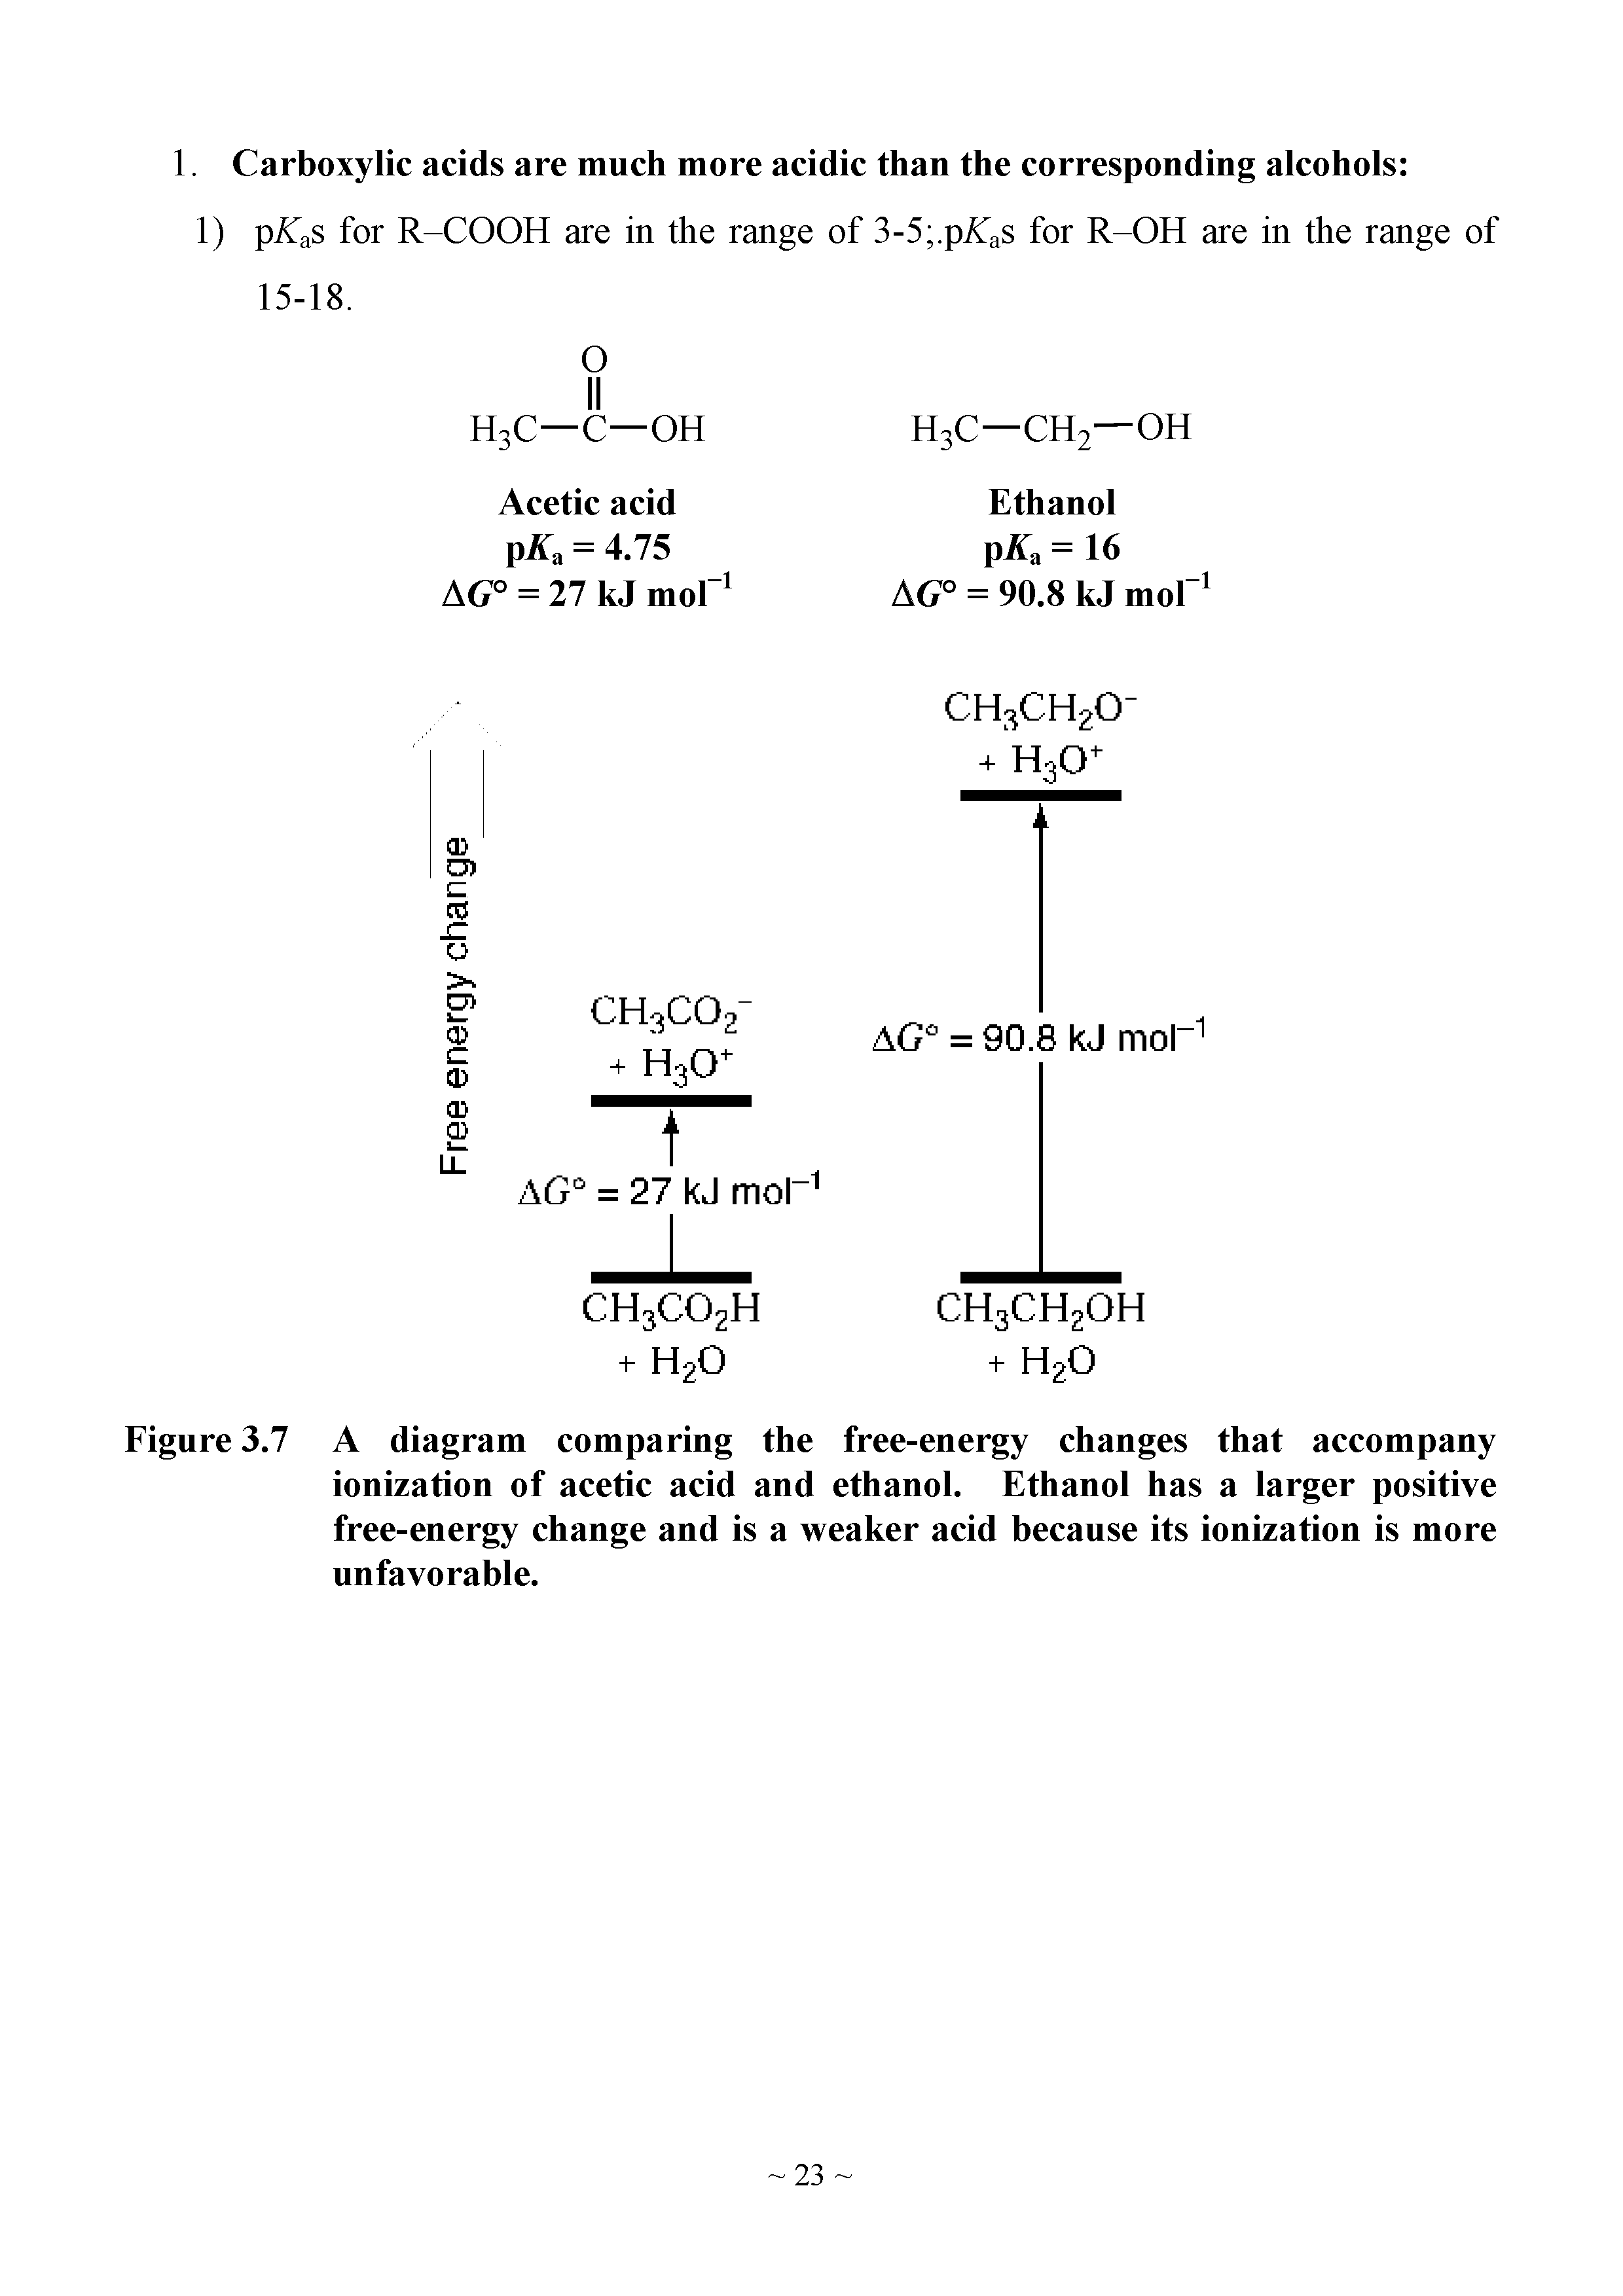 Figure 3.7 A diagram comparing the free-energy changes that accompany ionization of acetic acid and ethanol. Ethanol has a larger positive free-energy change and is a weaker acid because its ionization is more unfavorable.